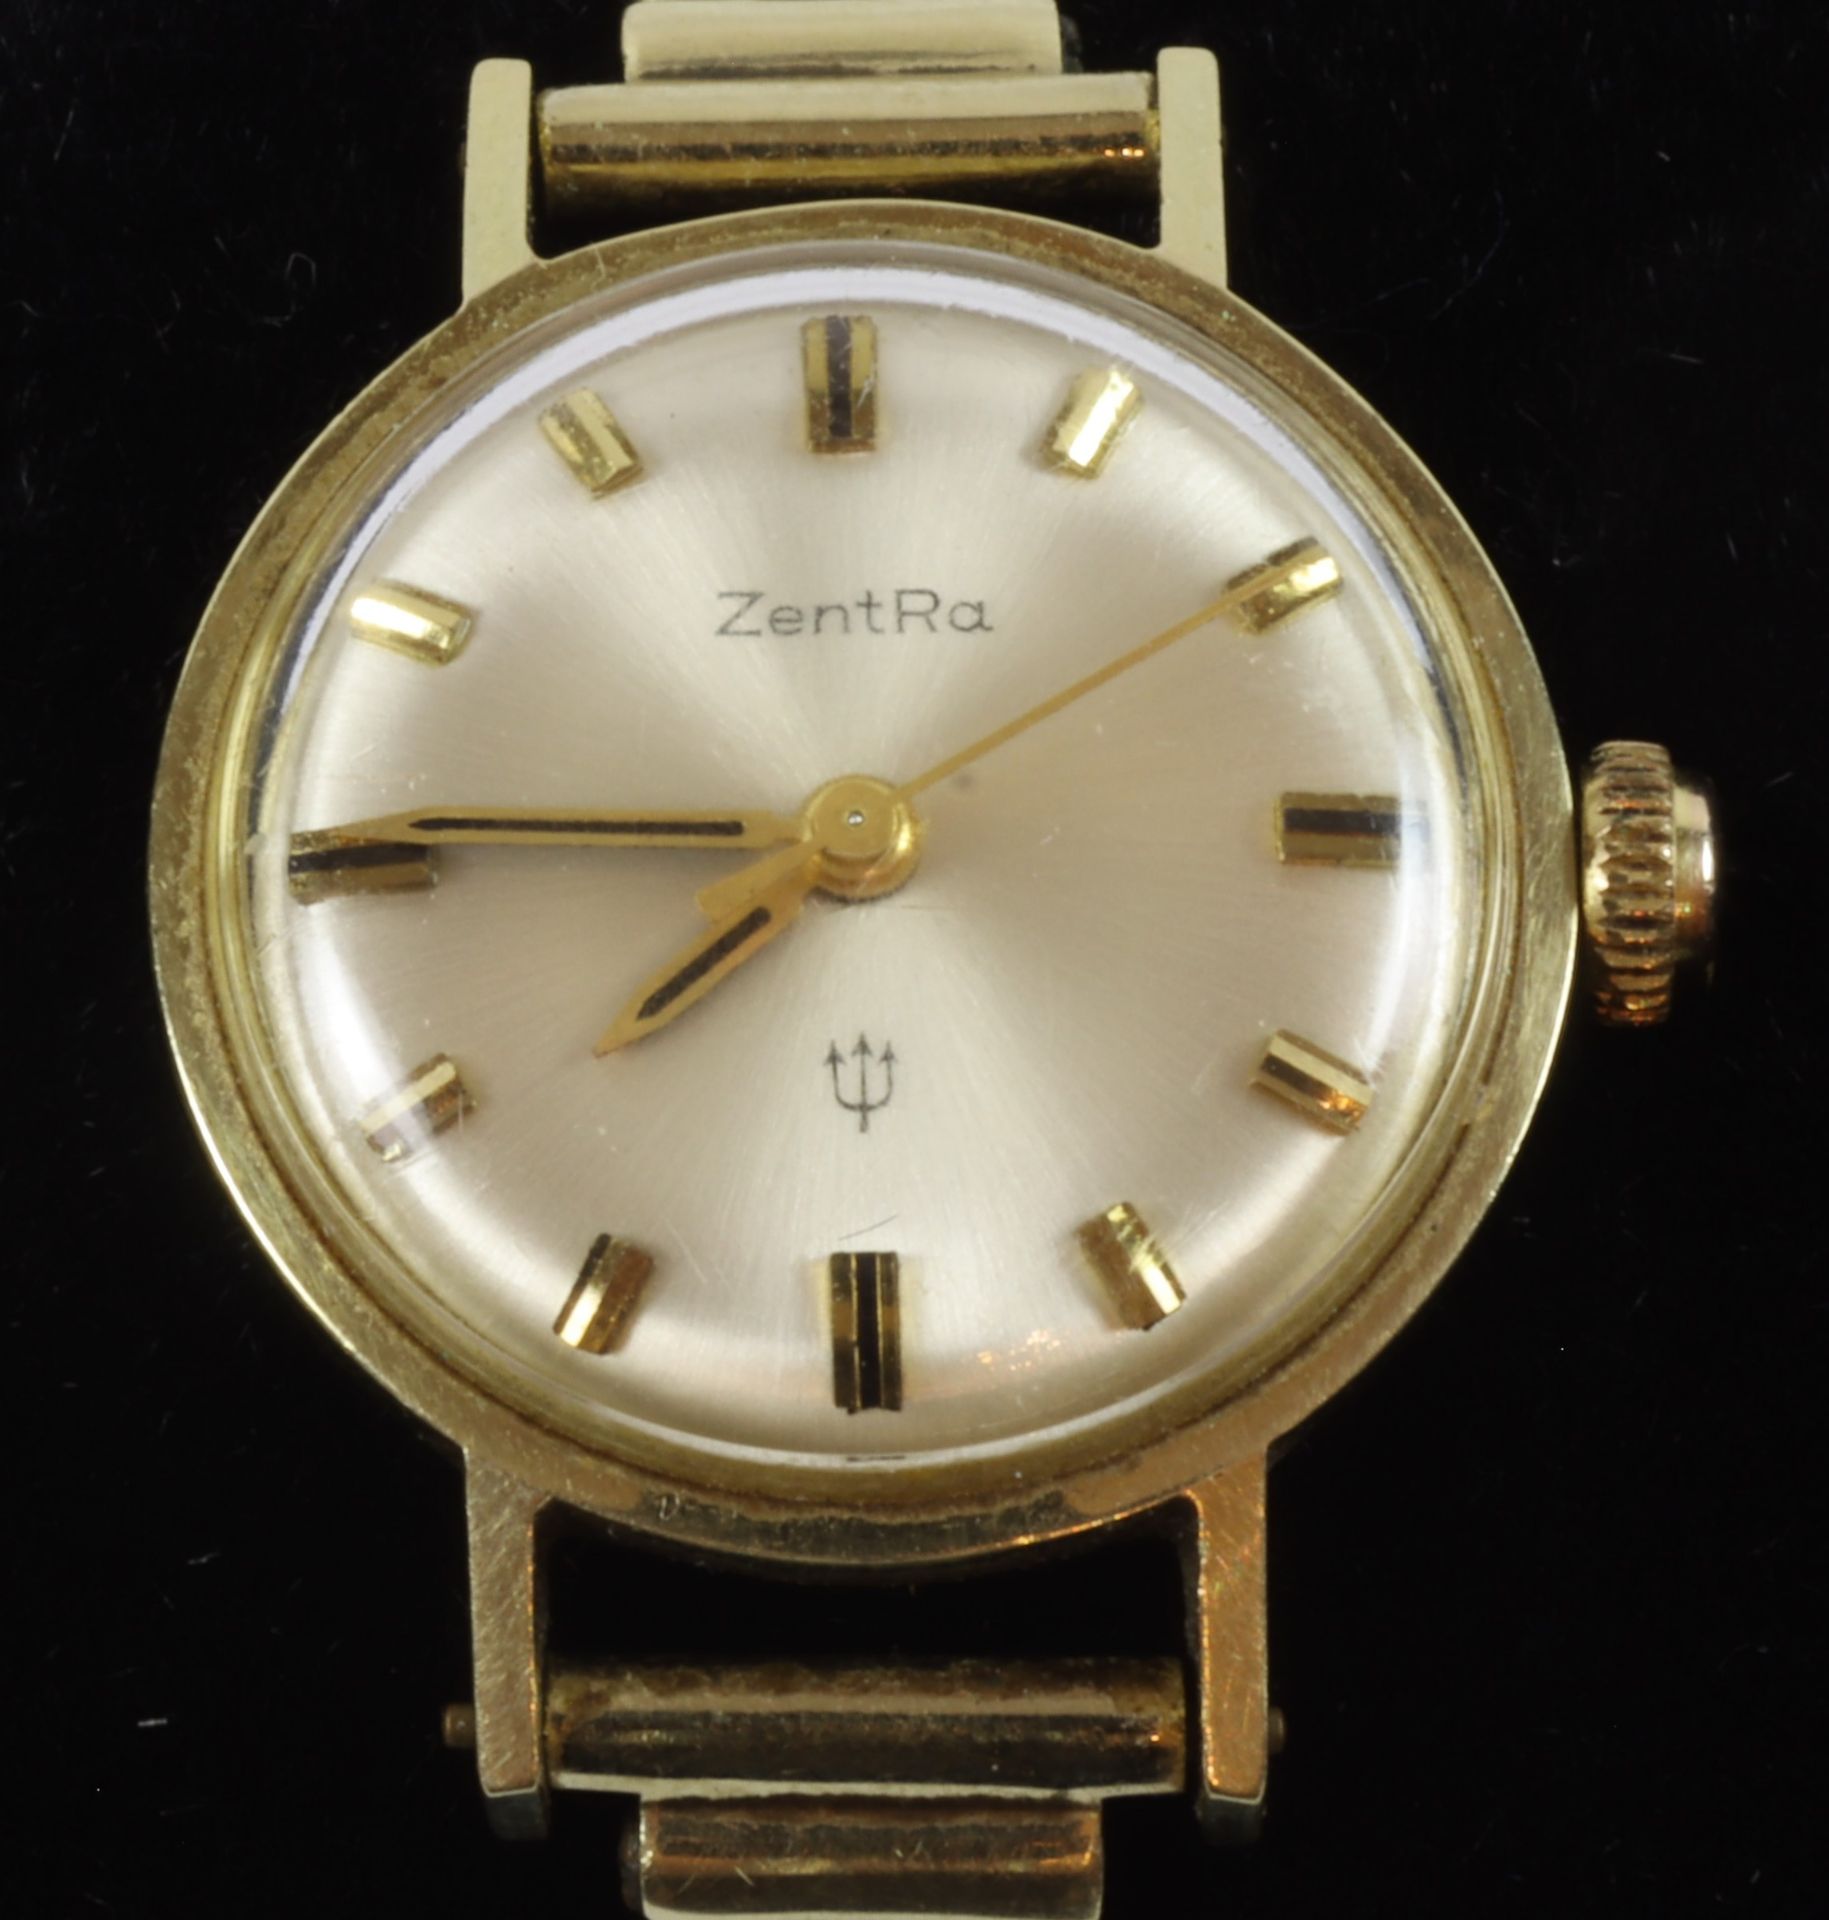 Two ladies' wristwatches, gold 585/1000 and gold-plated, 50s - 70s, GDR and FRG - Image 2 of 5